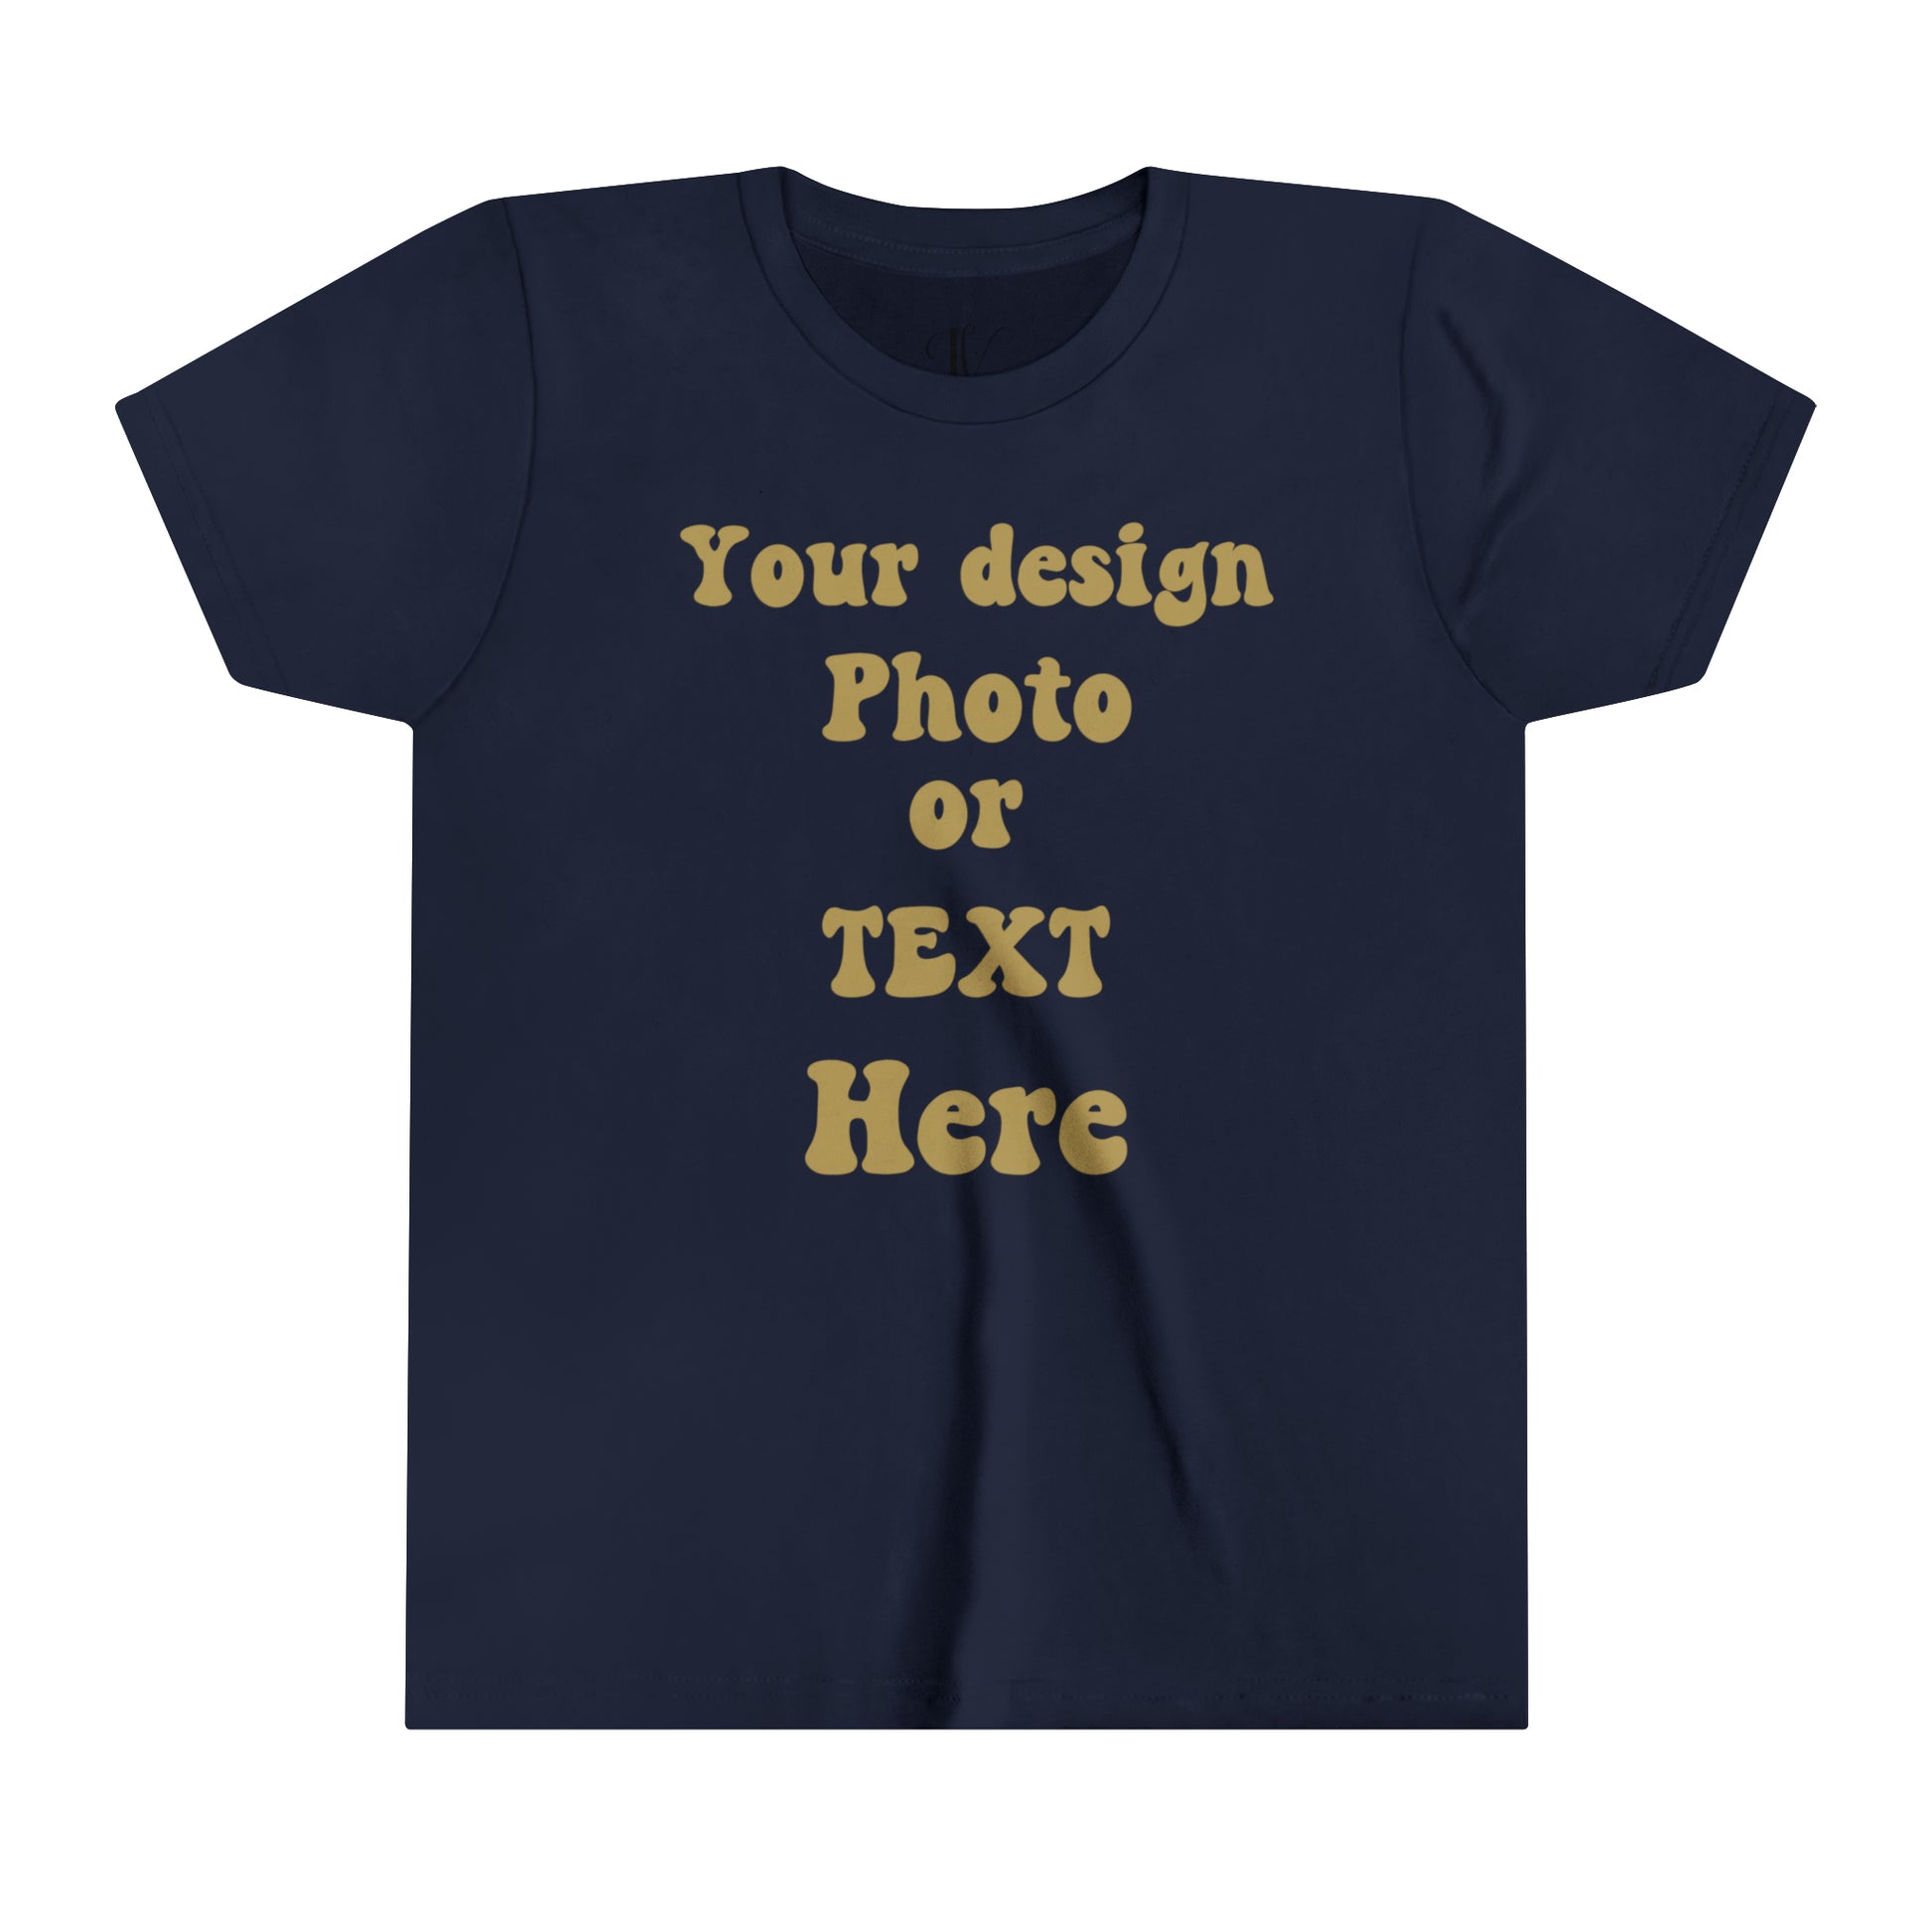 Youth Short Sleeve Tee - Personalized with Your Photo, Text, and Design Kids clothes Navy S 